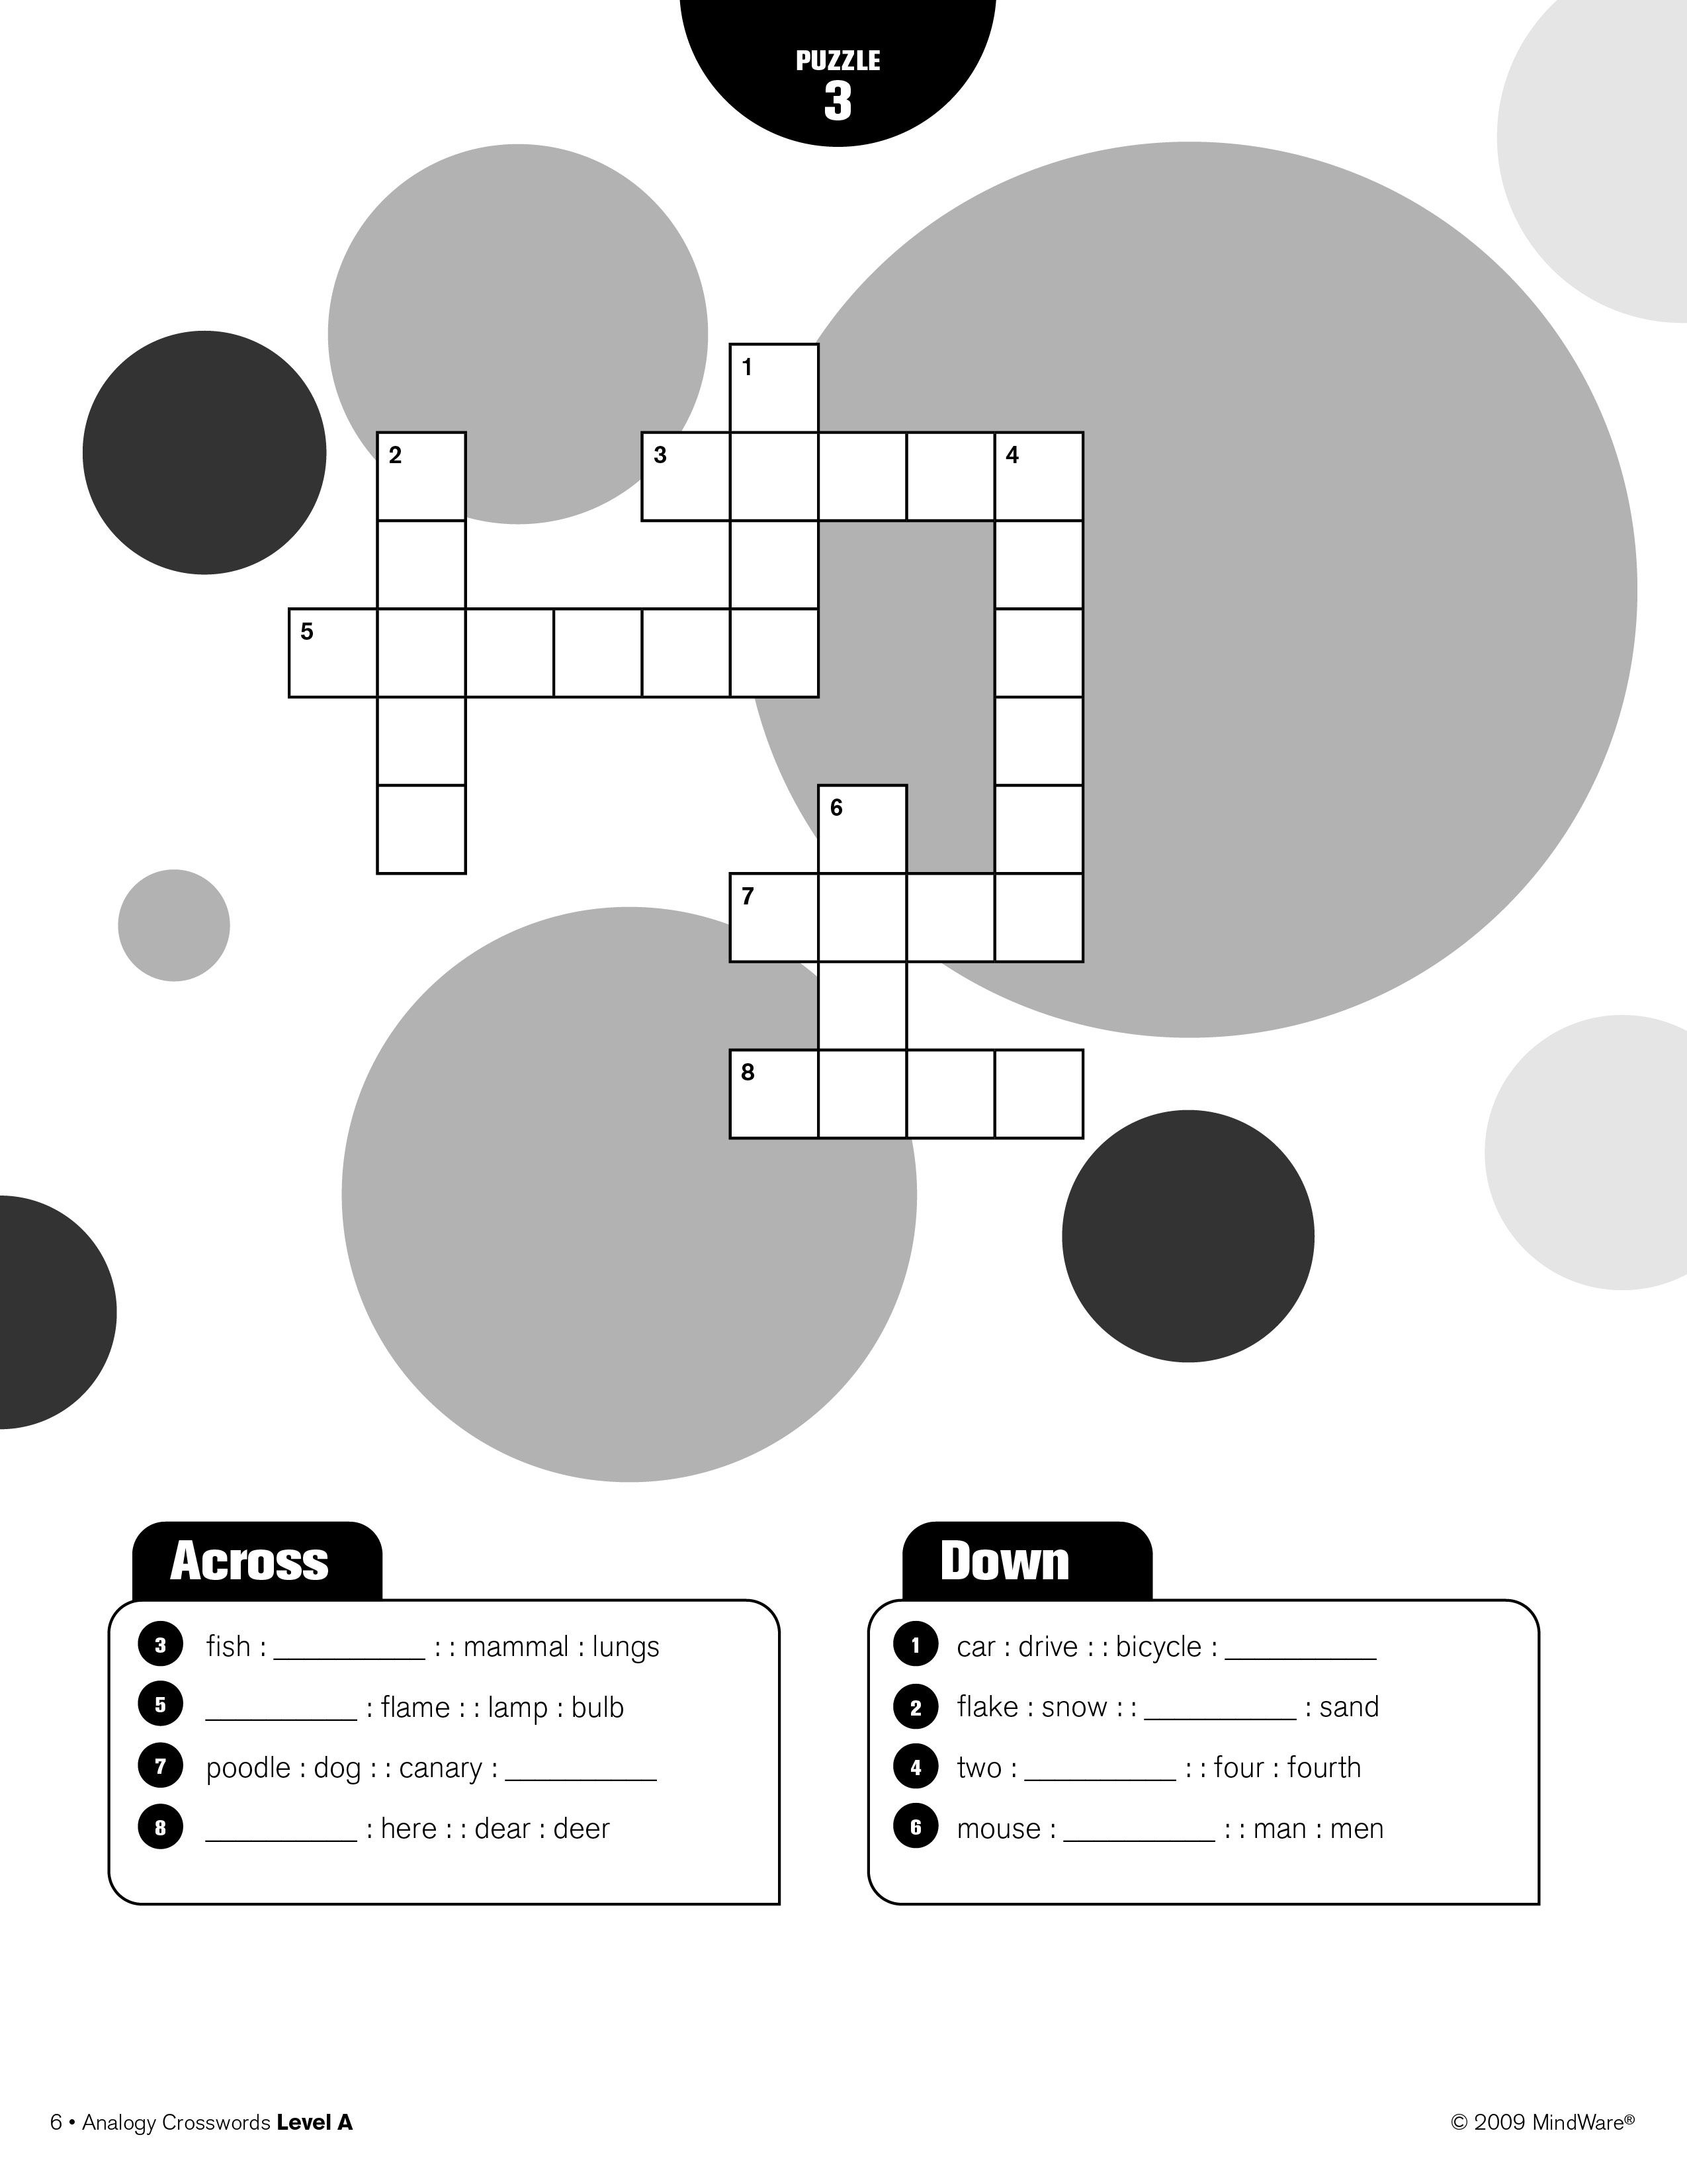 Free Activity! Try Out A Page From Our Analogy Crosswords Level A - Free Printable Word Winks